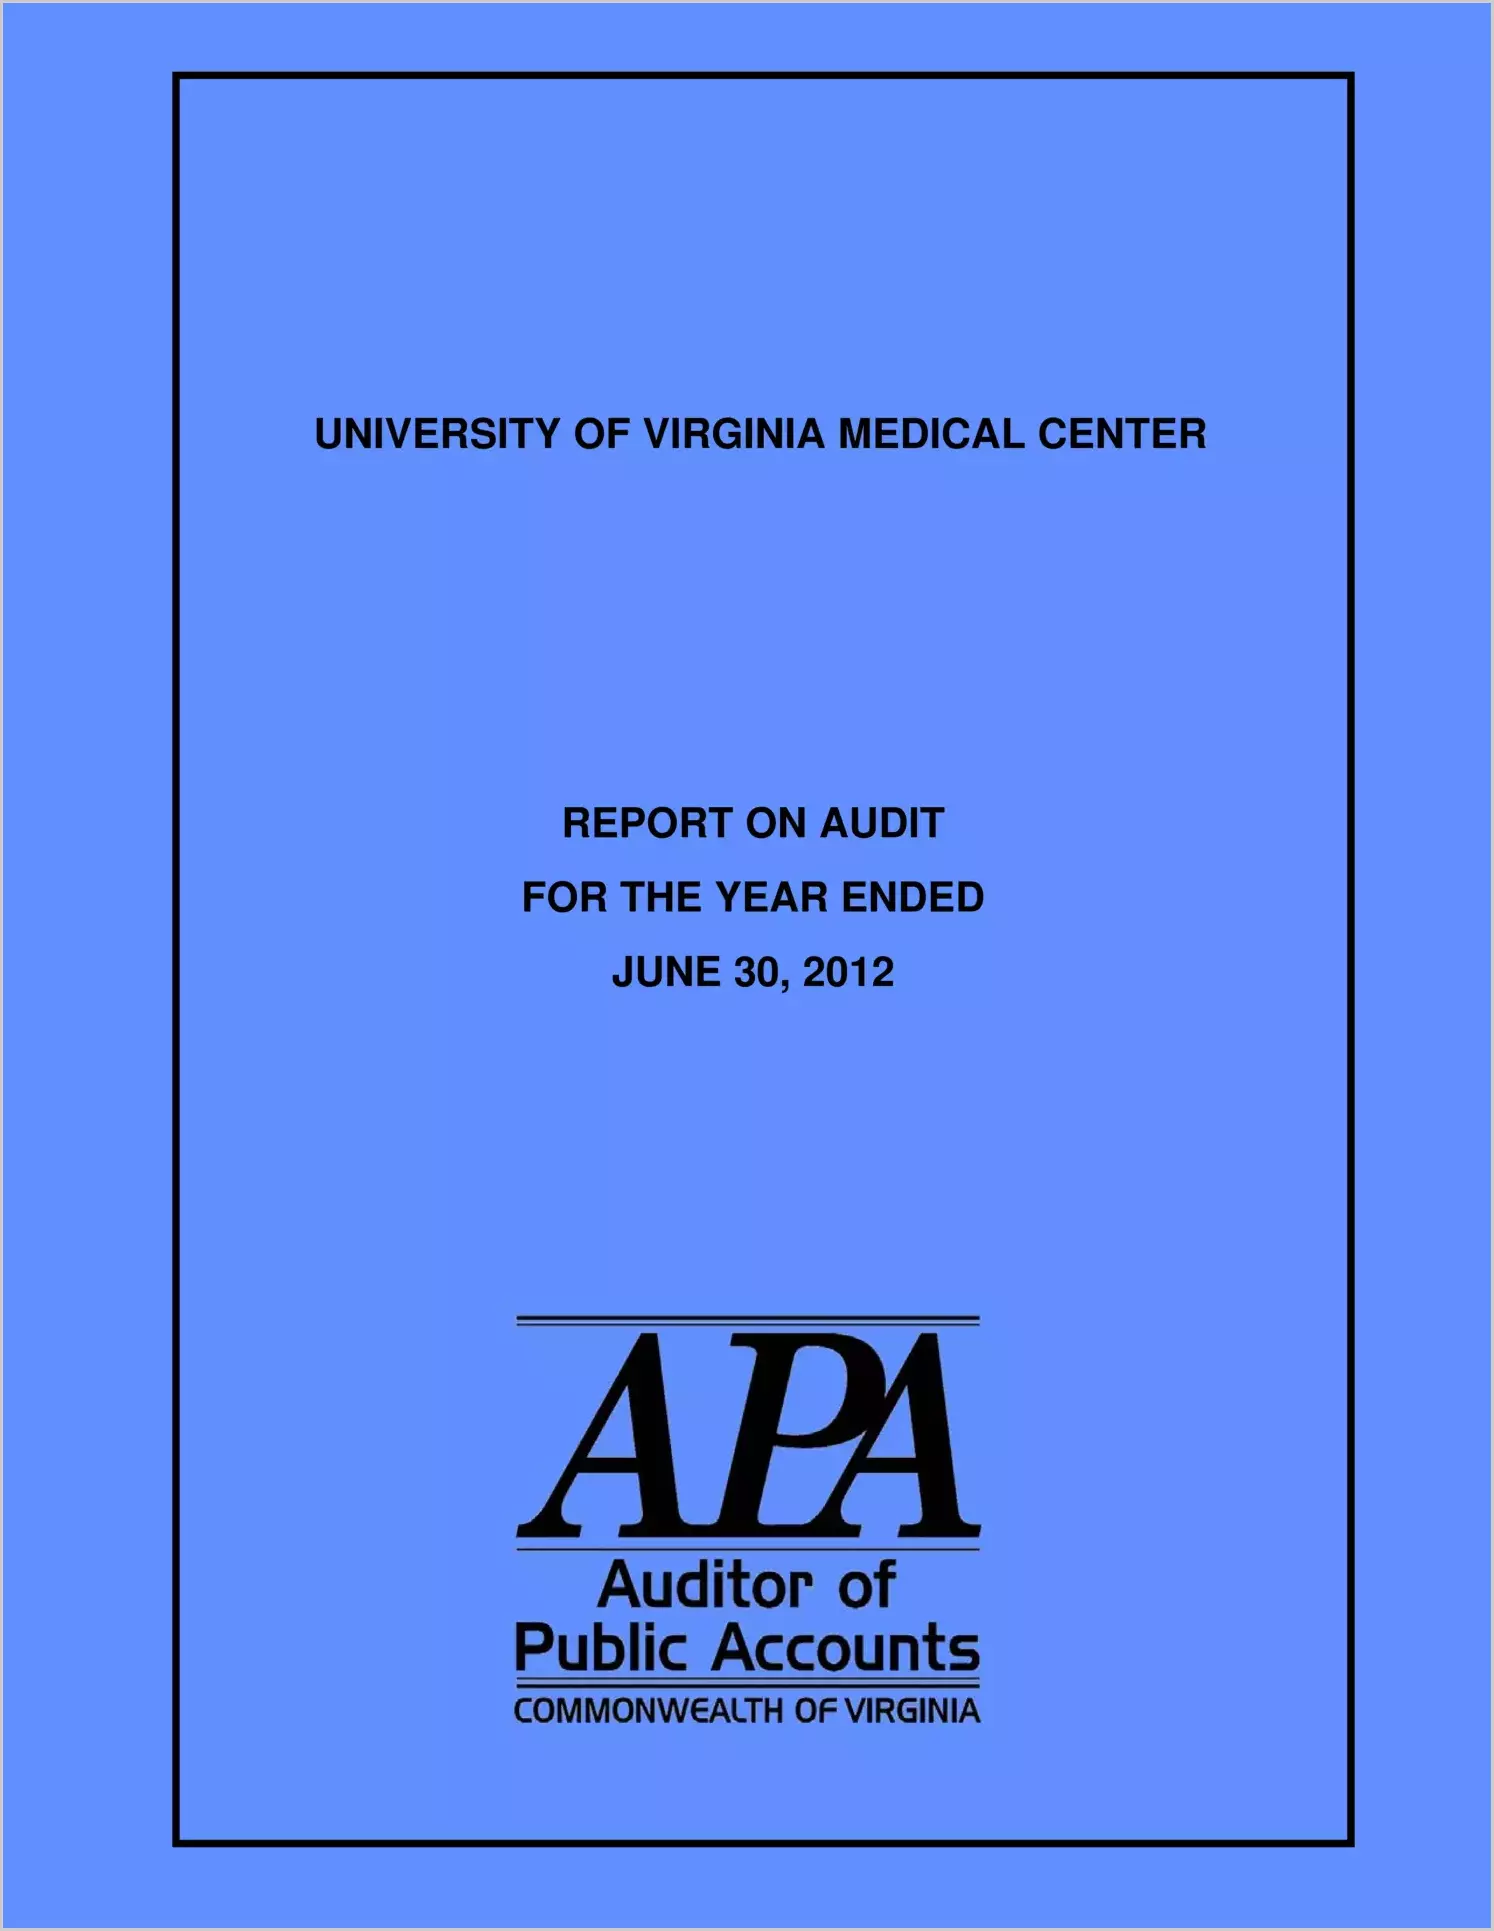 University of Virginia Medical Center Finanical Report for the year ended June 30, 2012